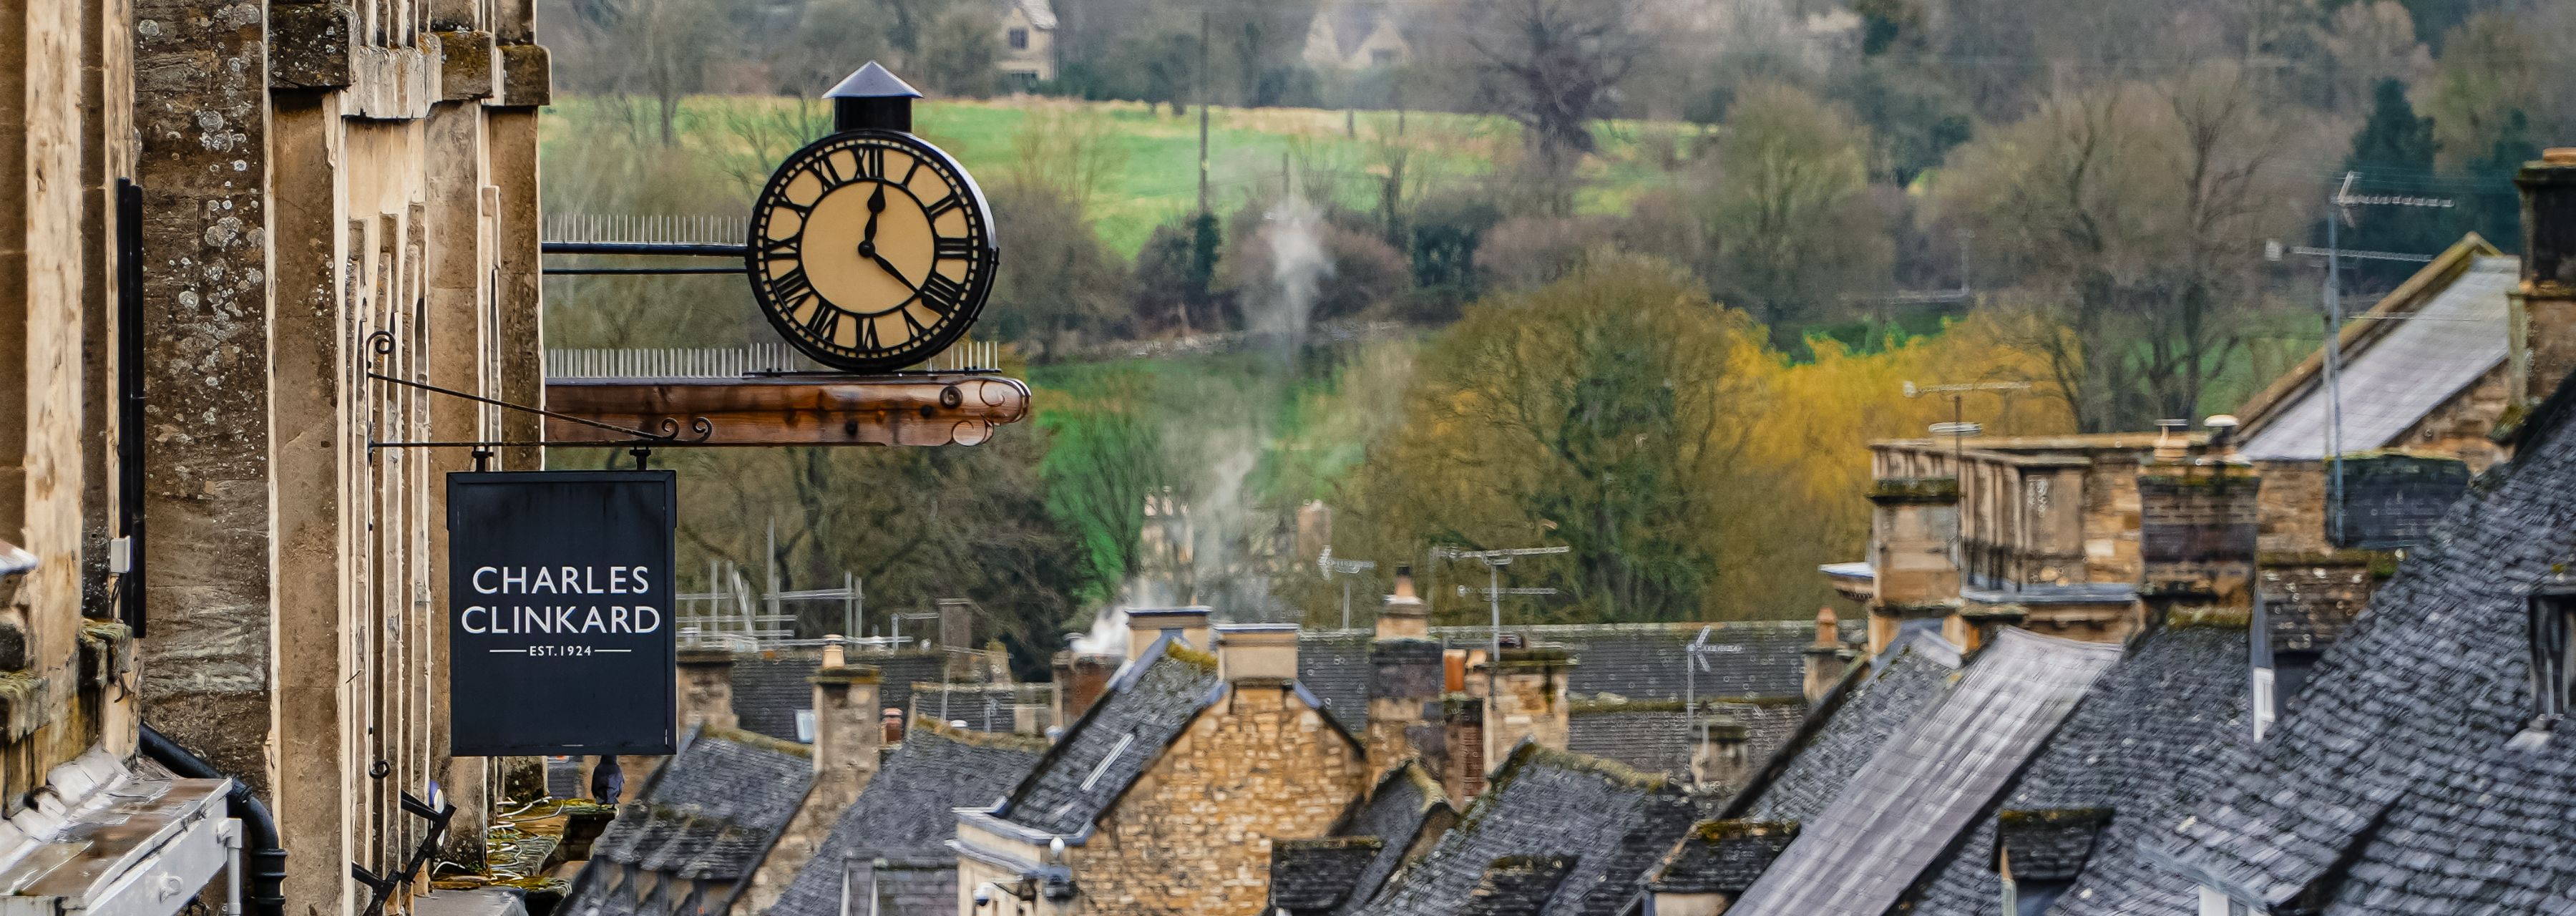 london day tours to cotswolds